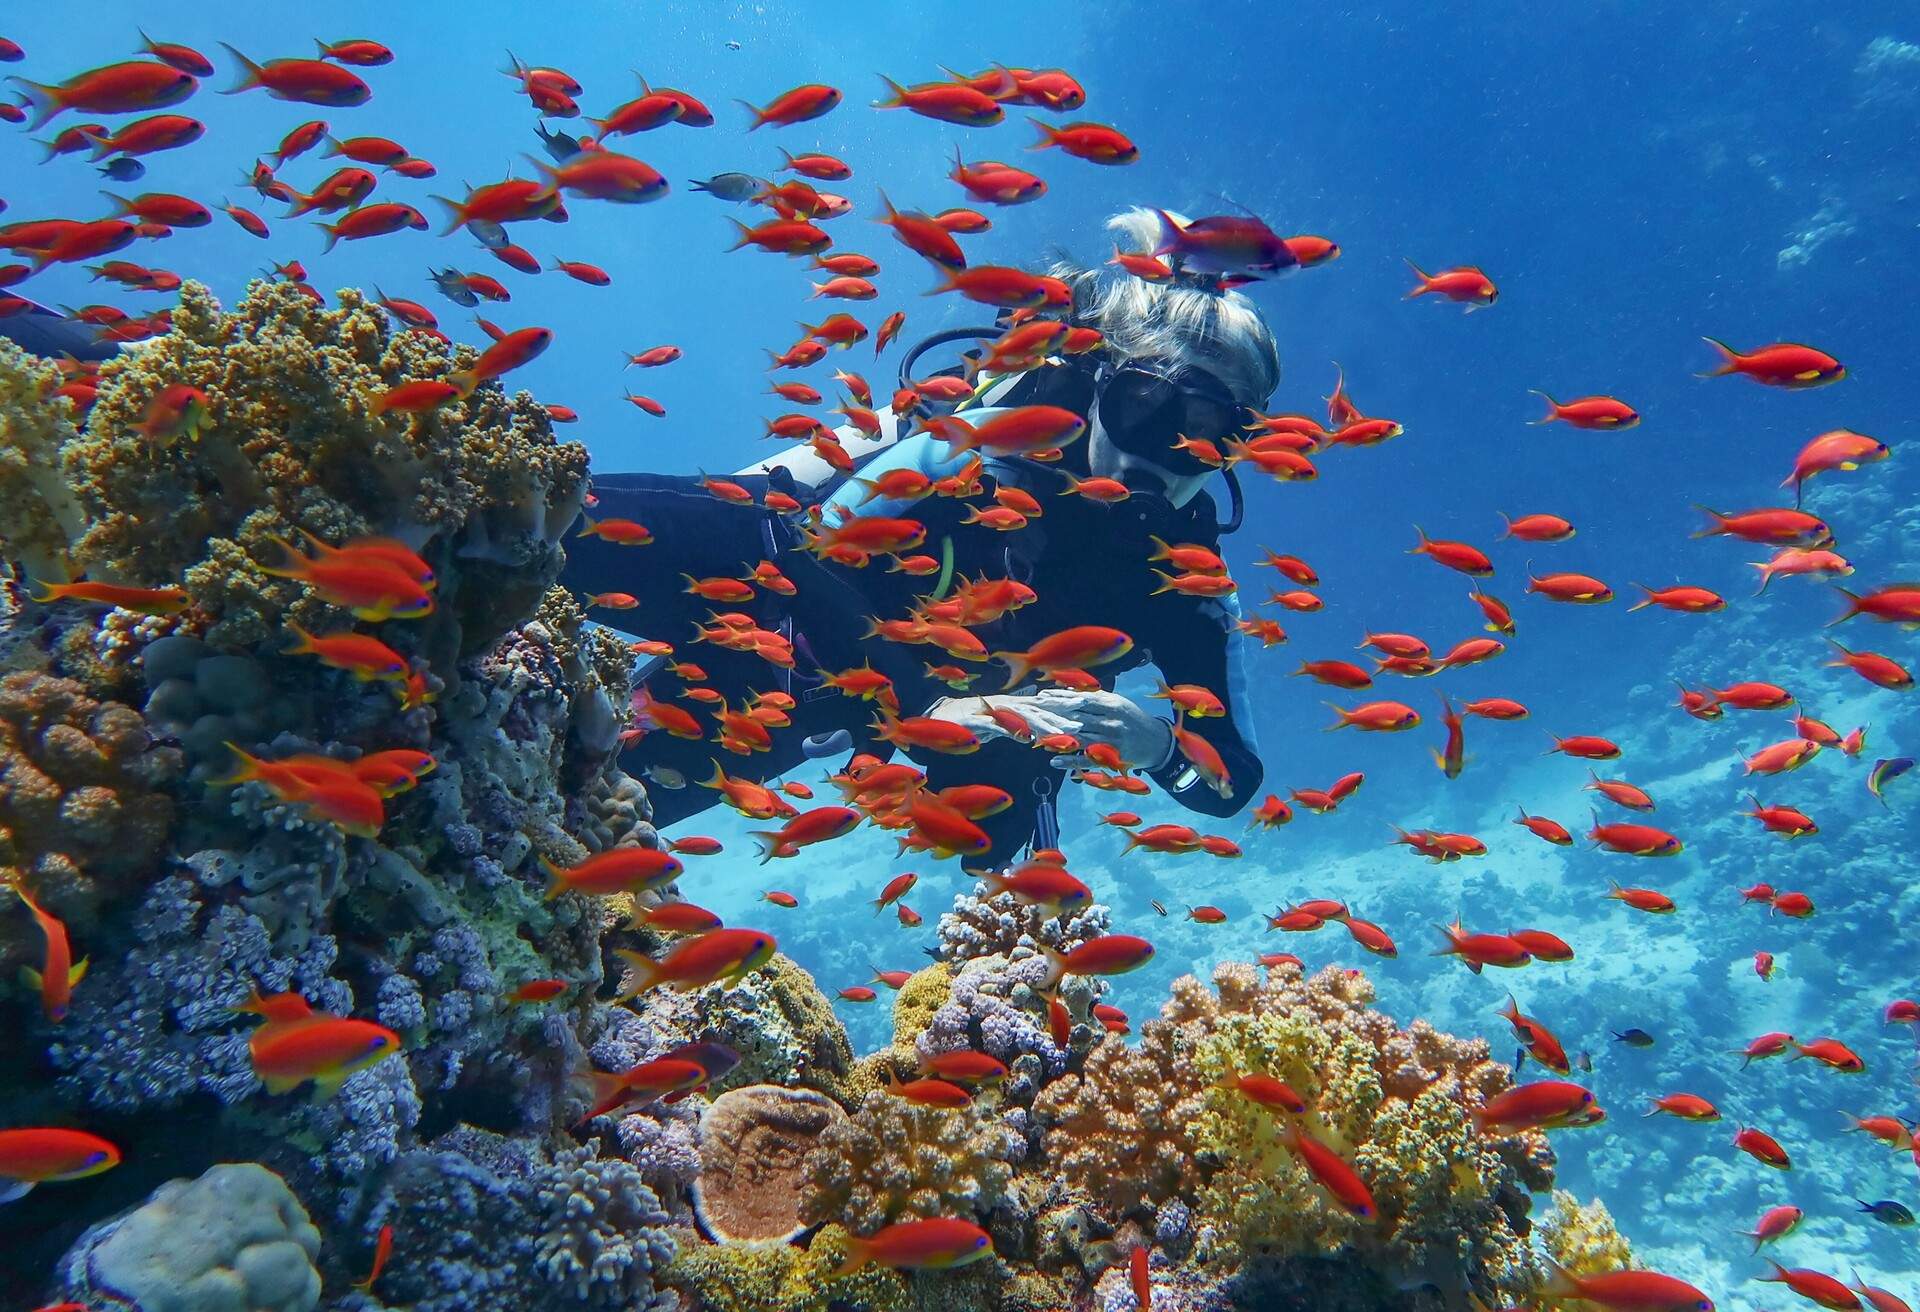 Woman scuba diver near beautiful coral reef  - surrounded with shoal of beautiful red coral fish, anthias